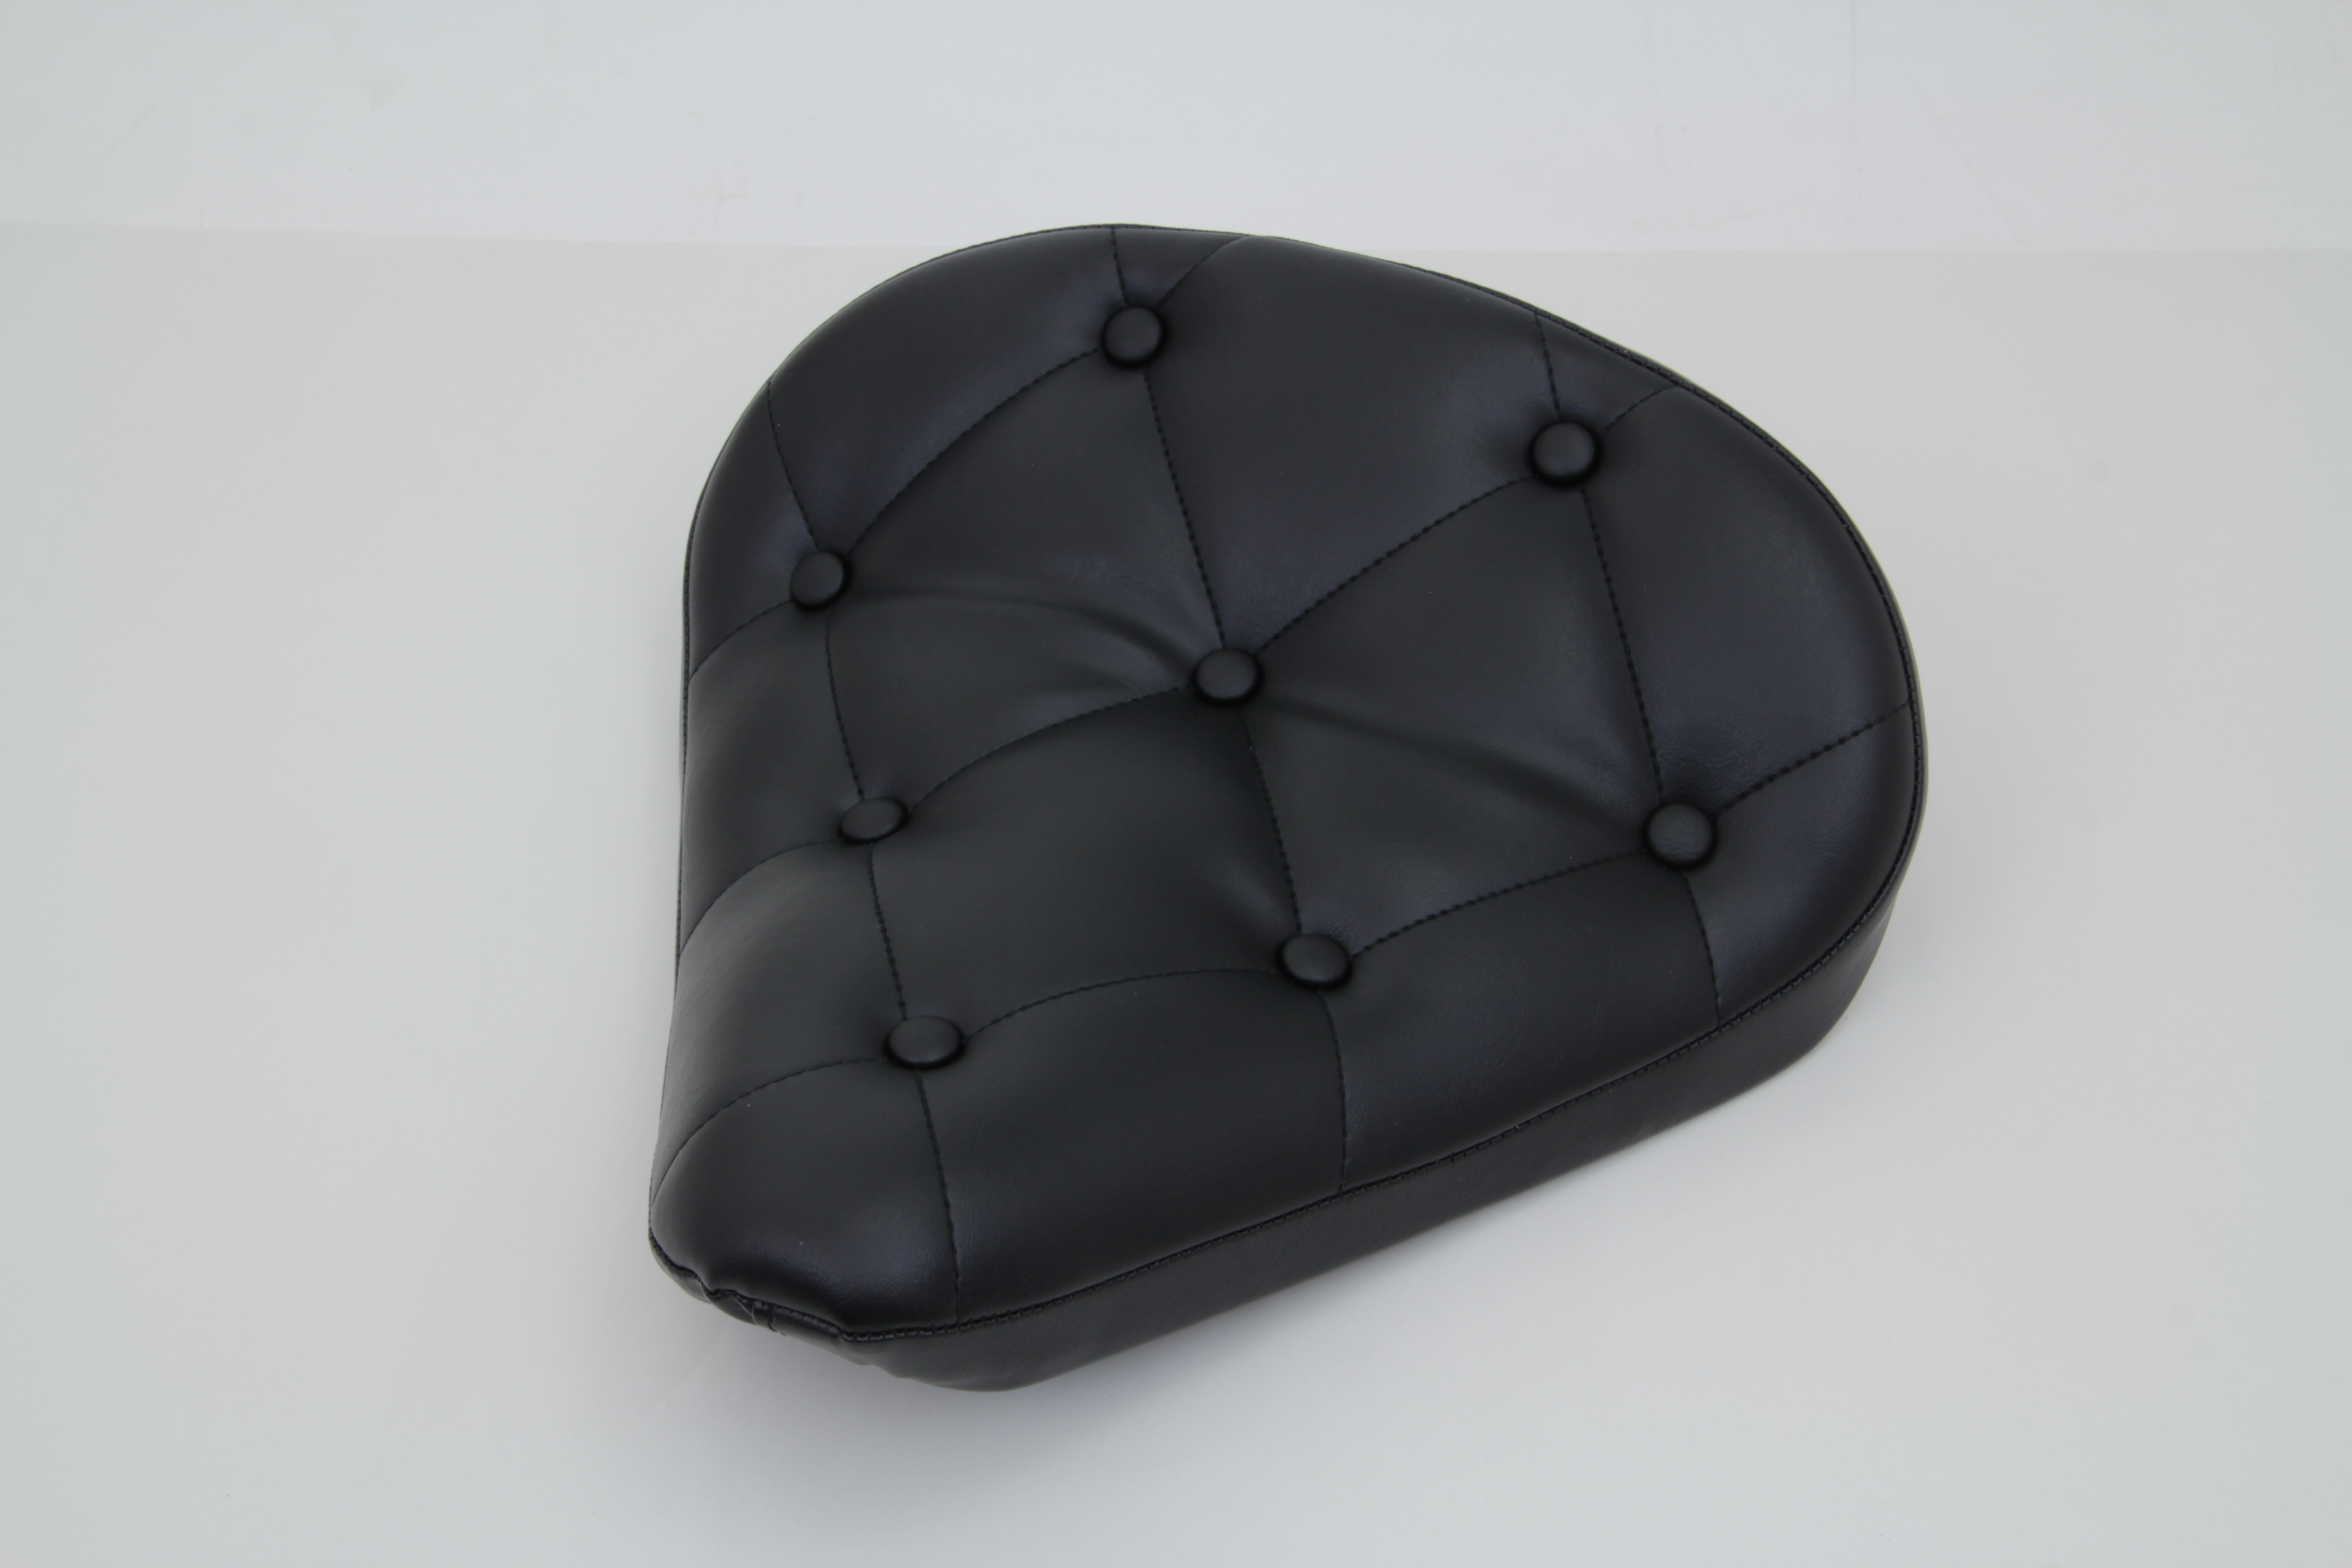 Black Vinyl Solo Seat with Buttons, 13" Long, 14" Wide